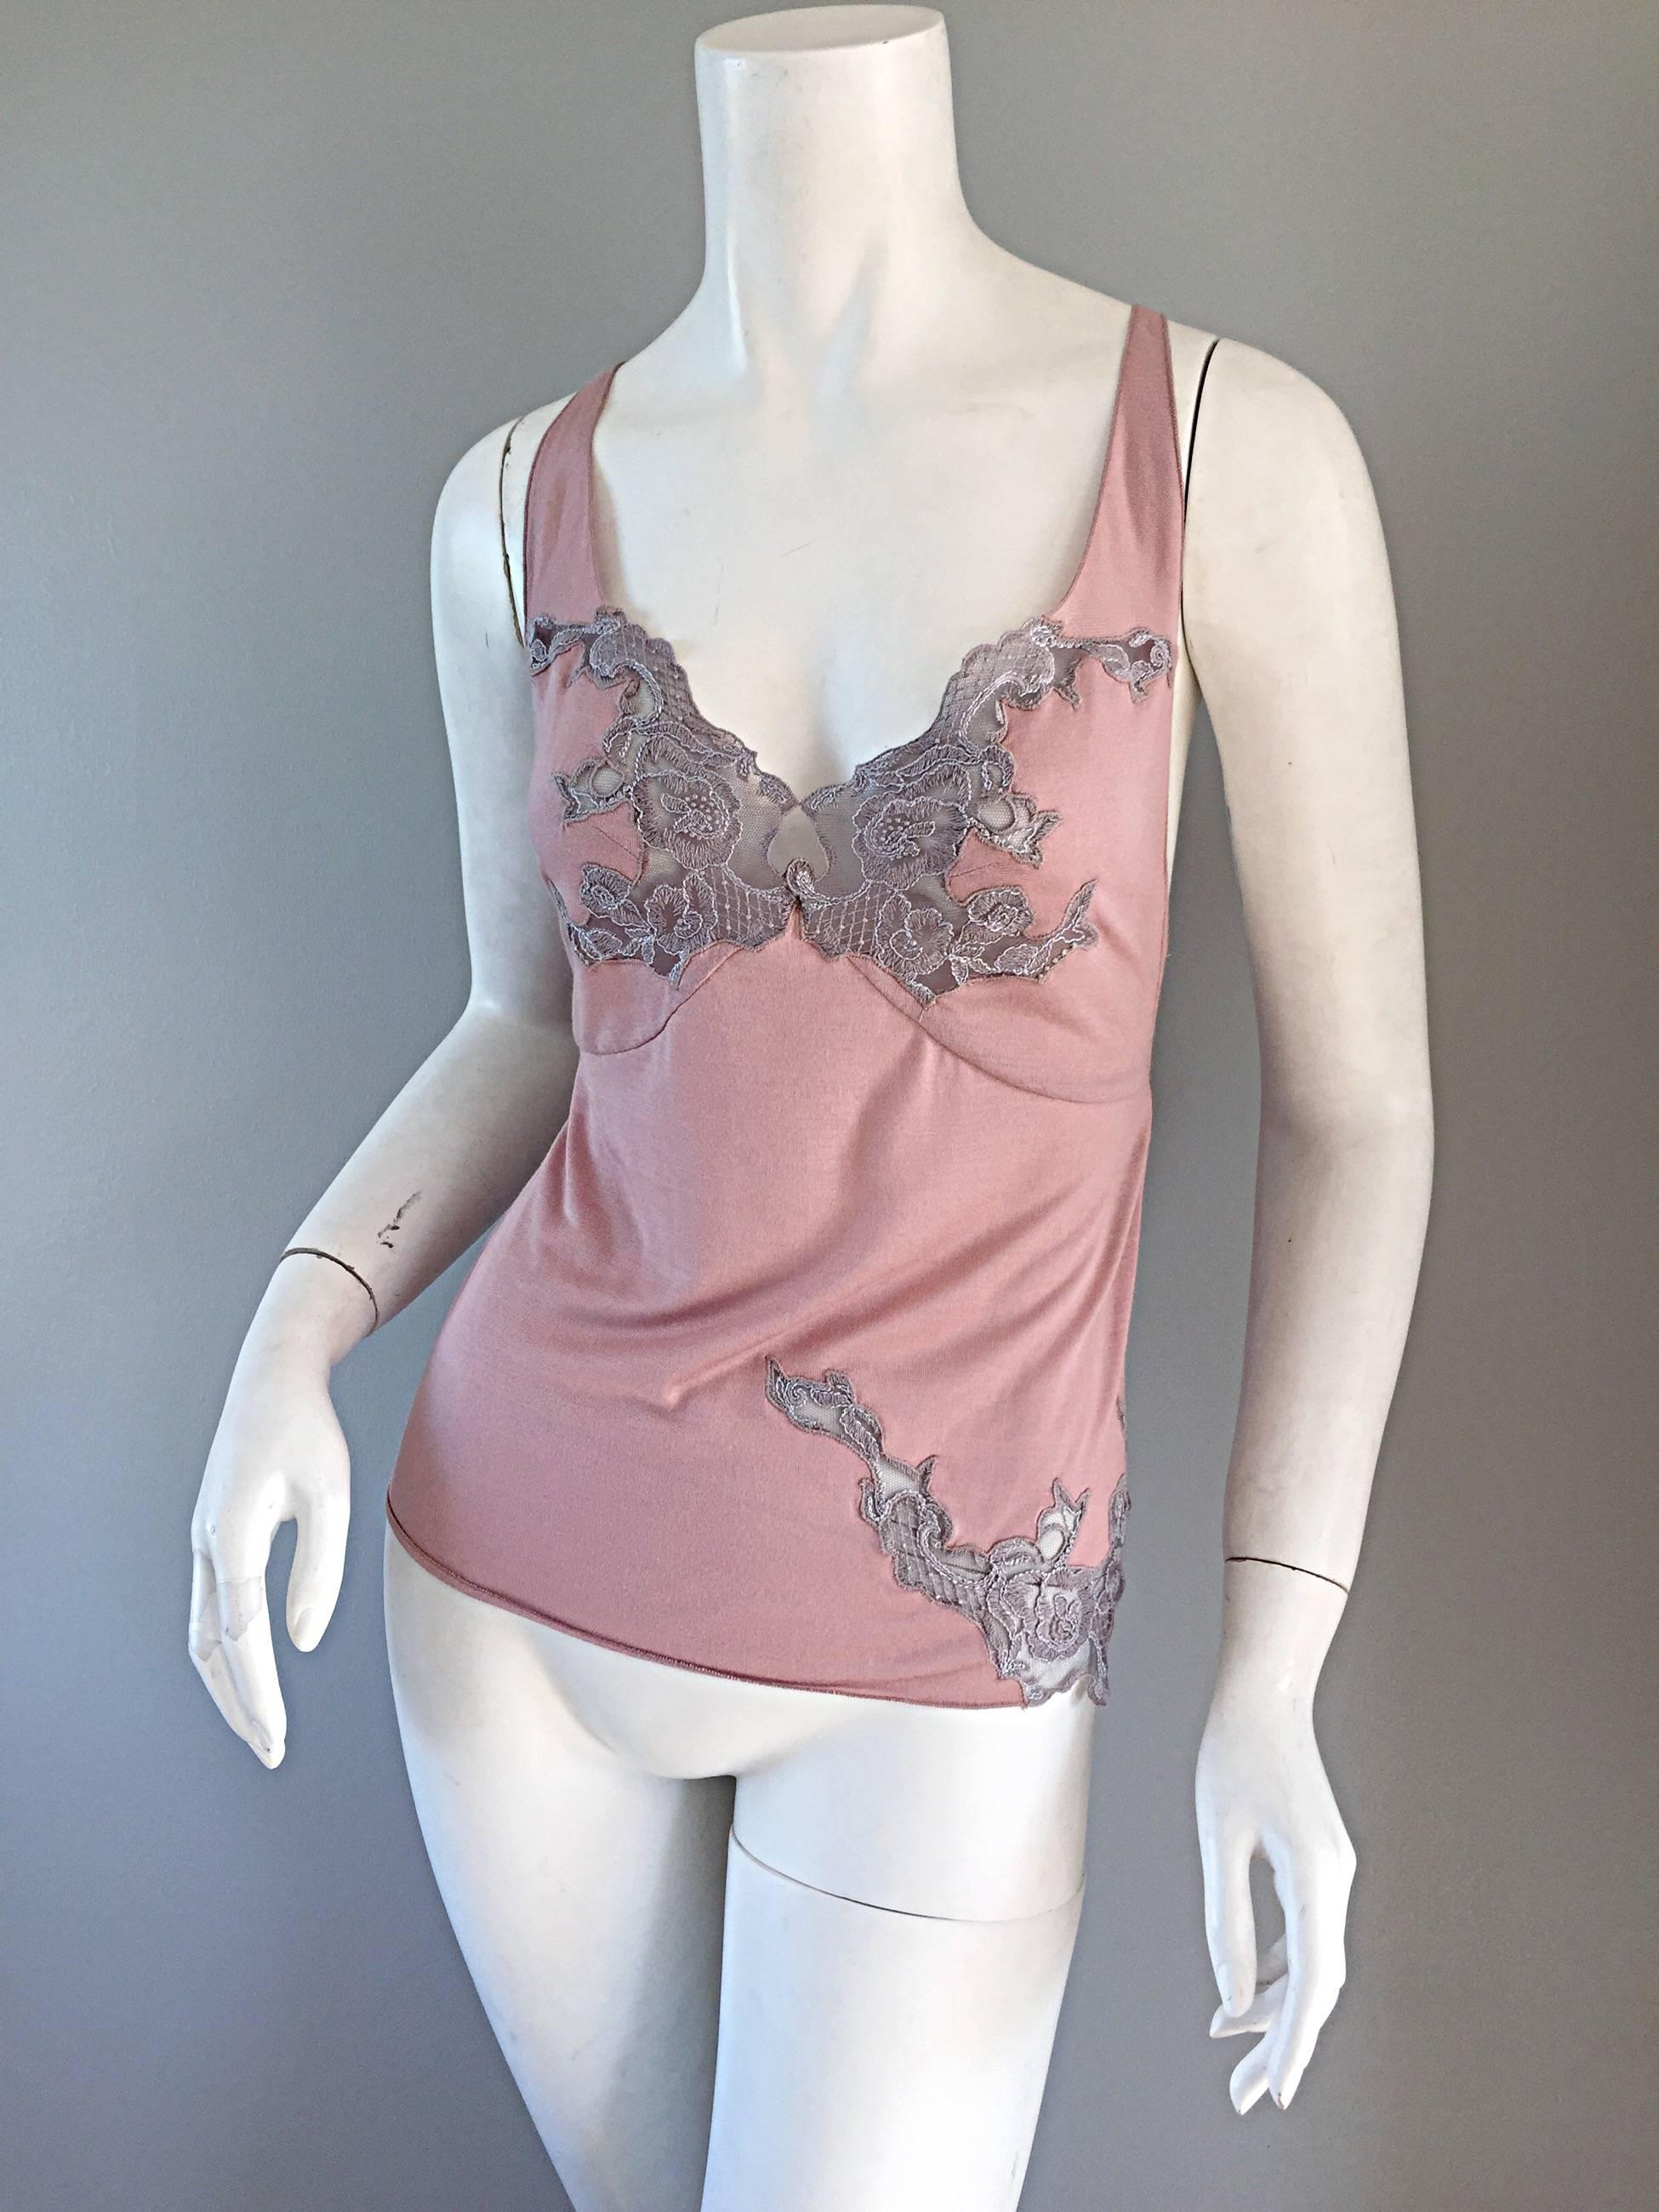 Phoebe Philo for Chloe Pink + Gray Blouse w/ Beautiful Lace Detail In Excellent Condition For Sale In San Diego, CA